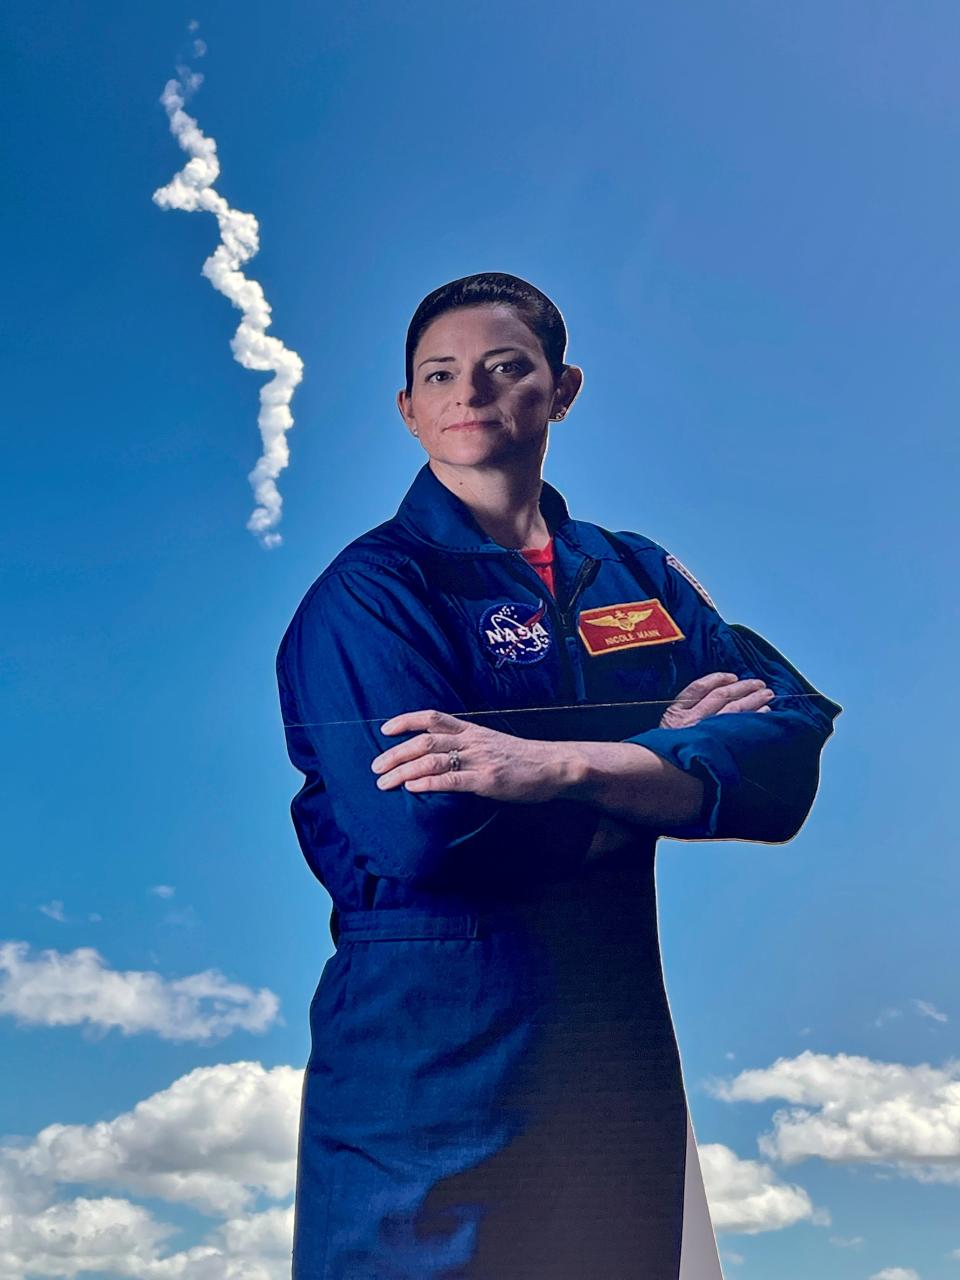 Crew-5's SpaceX Falcon 9 rocket exhaust plume swirls in the sky above a cardboard cutout of mission commander Nicole Mann during a Wednesday watch party at The Space Bar in Titusville.